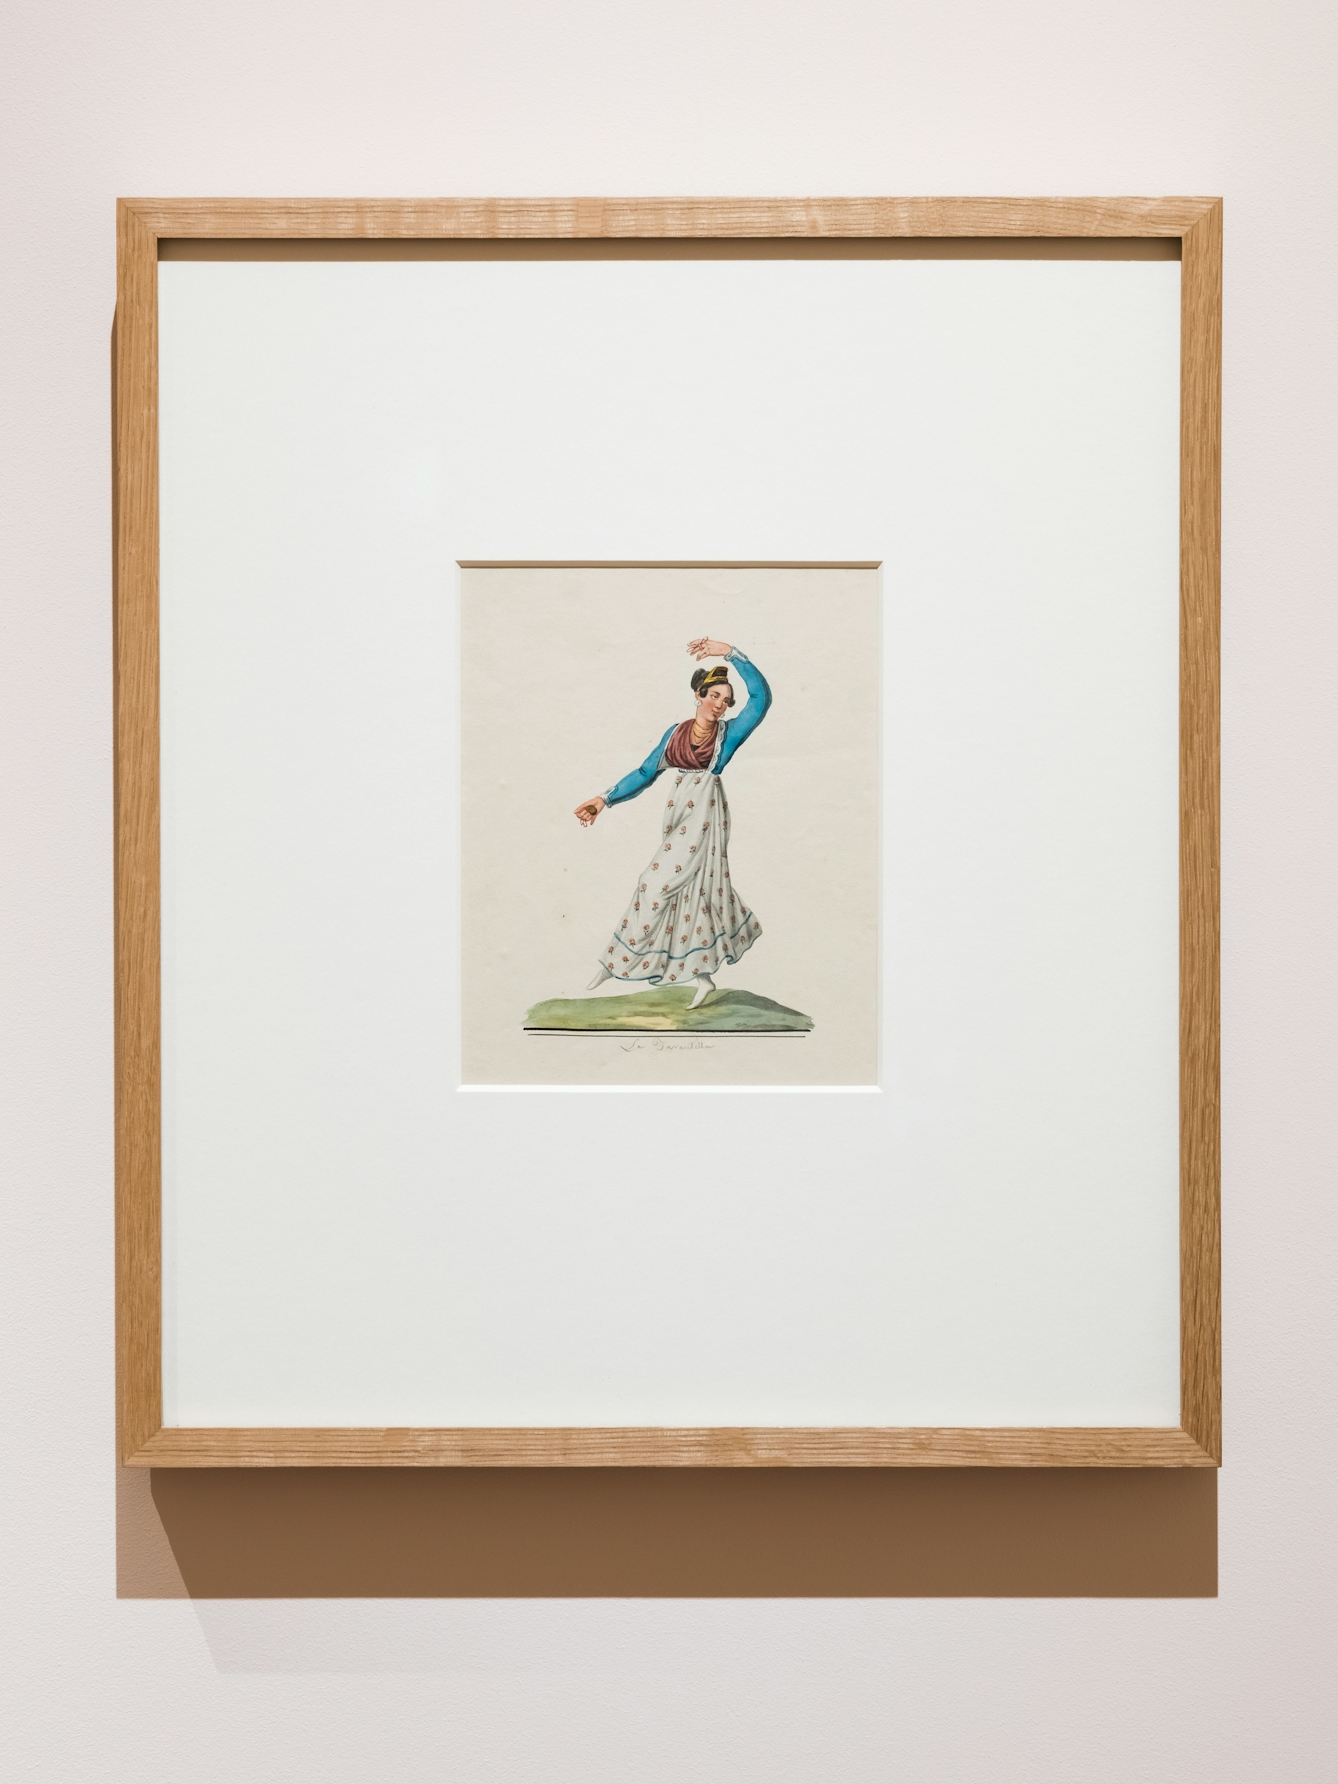 Photograph of an exhibition gallery showing a section of light pink coloured wall on which a framed print in a wooden frame has been hung. In a window mount within the frame is a colourful drawing of a woman dancing the tarantella, one arm raised over her head, one leg raised.